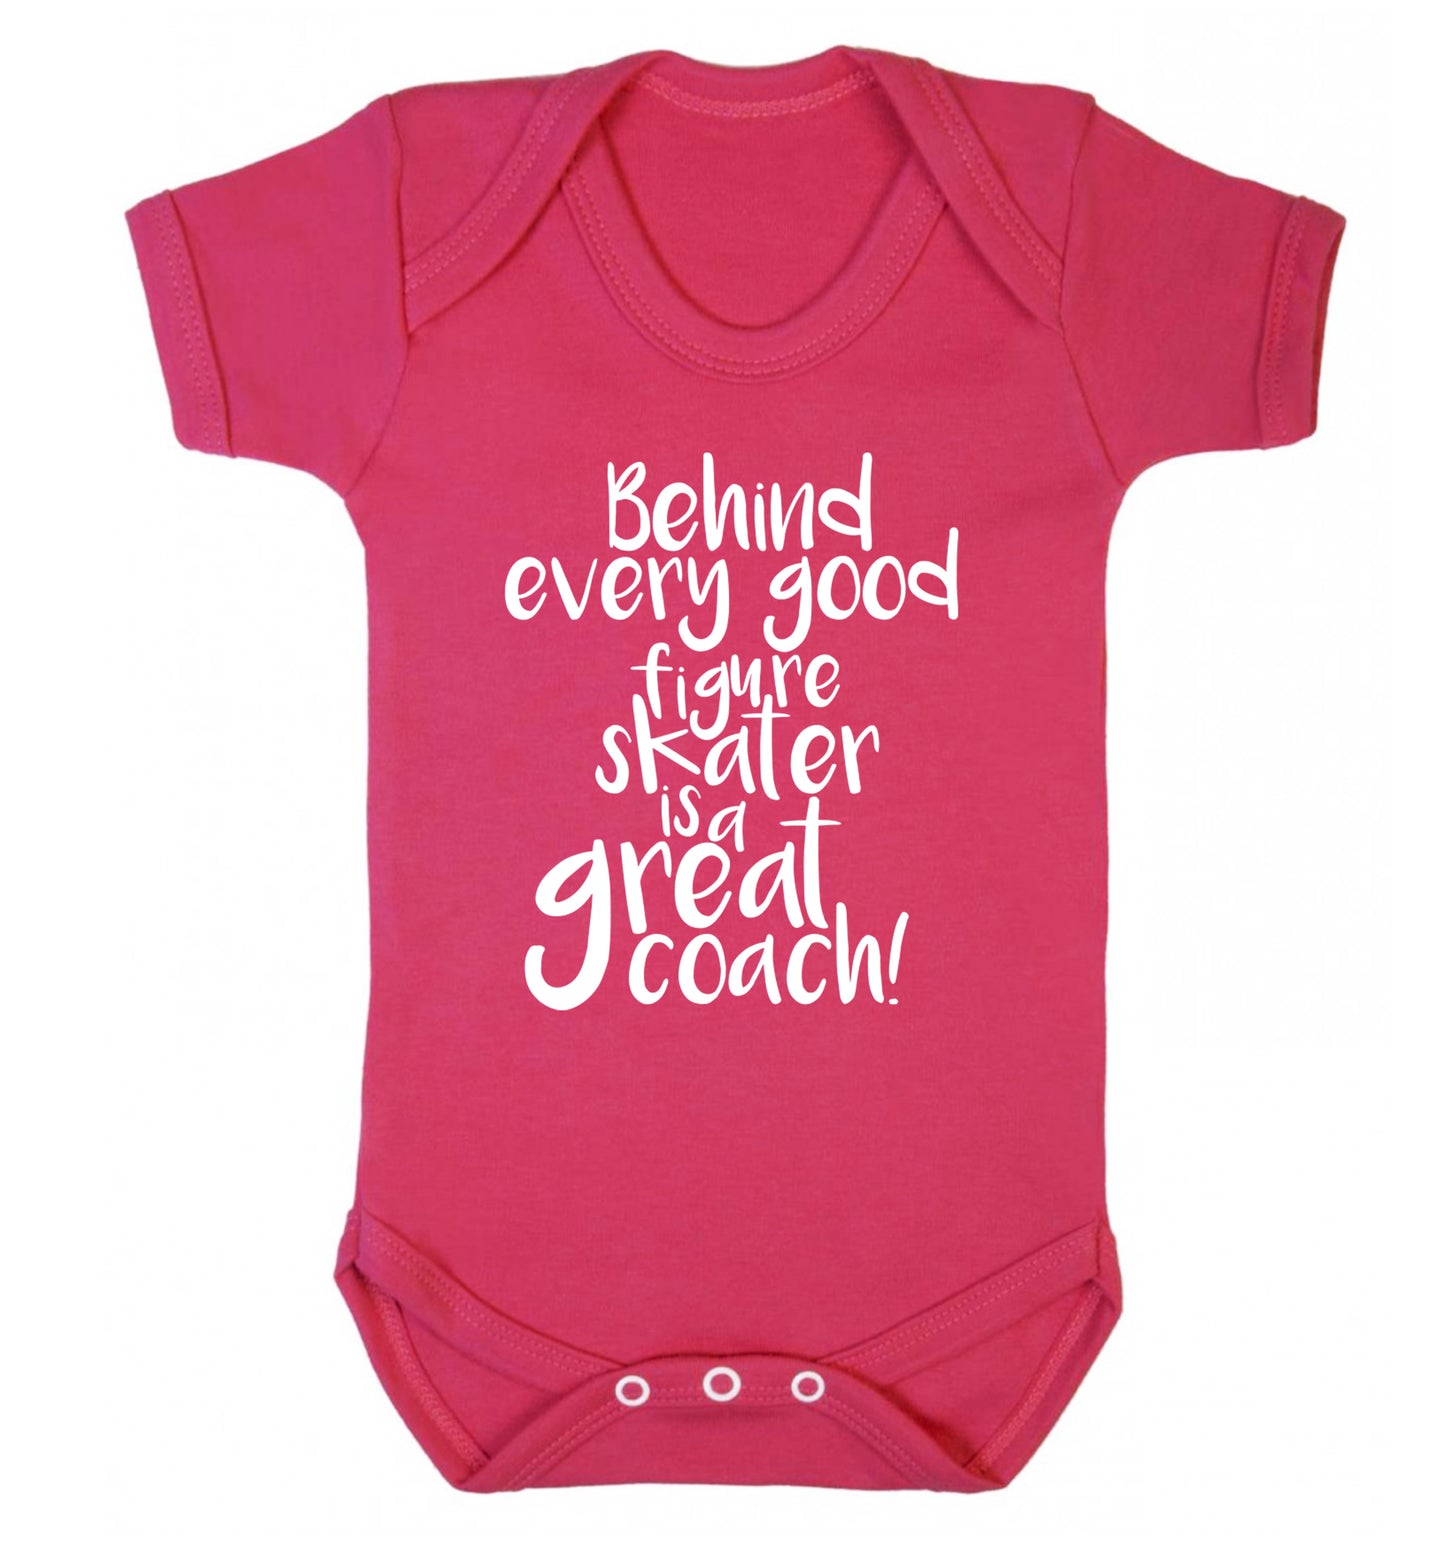 Behind every good figure skater is a great coach Baby Vest dark pink 18-24 months